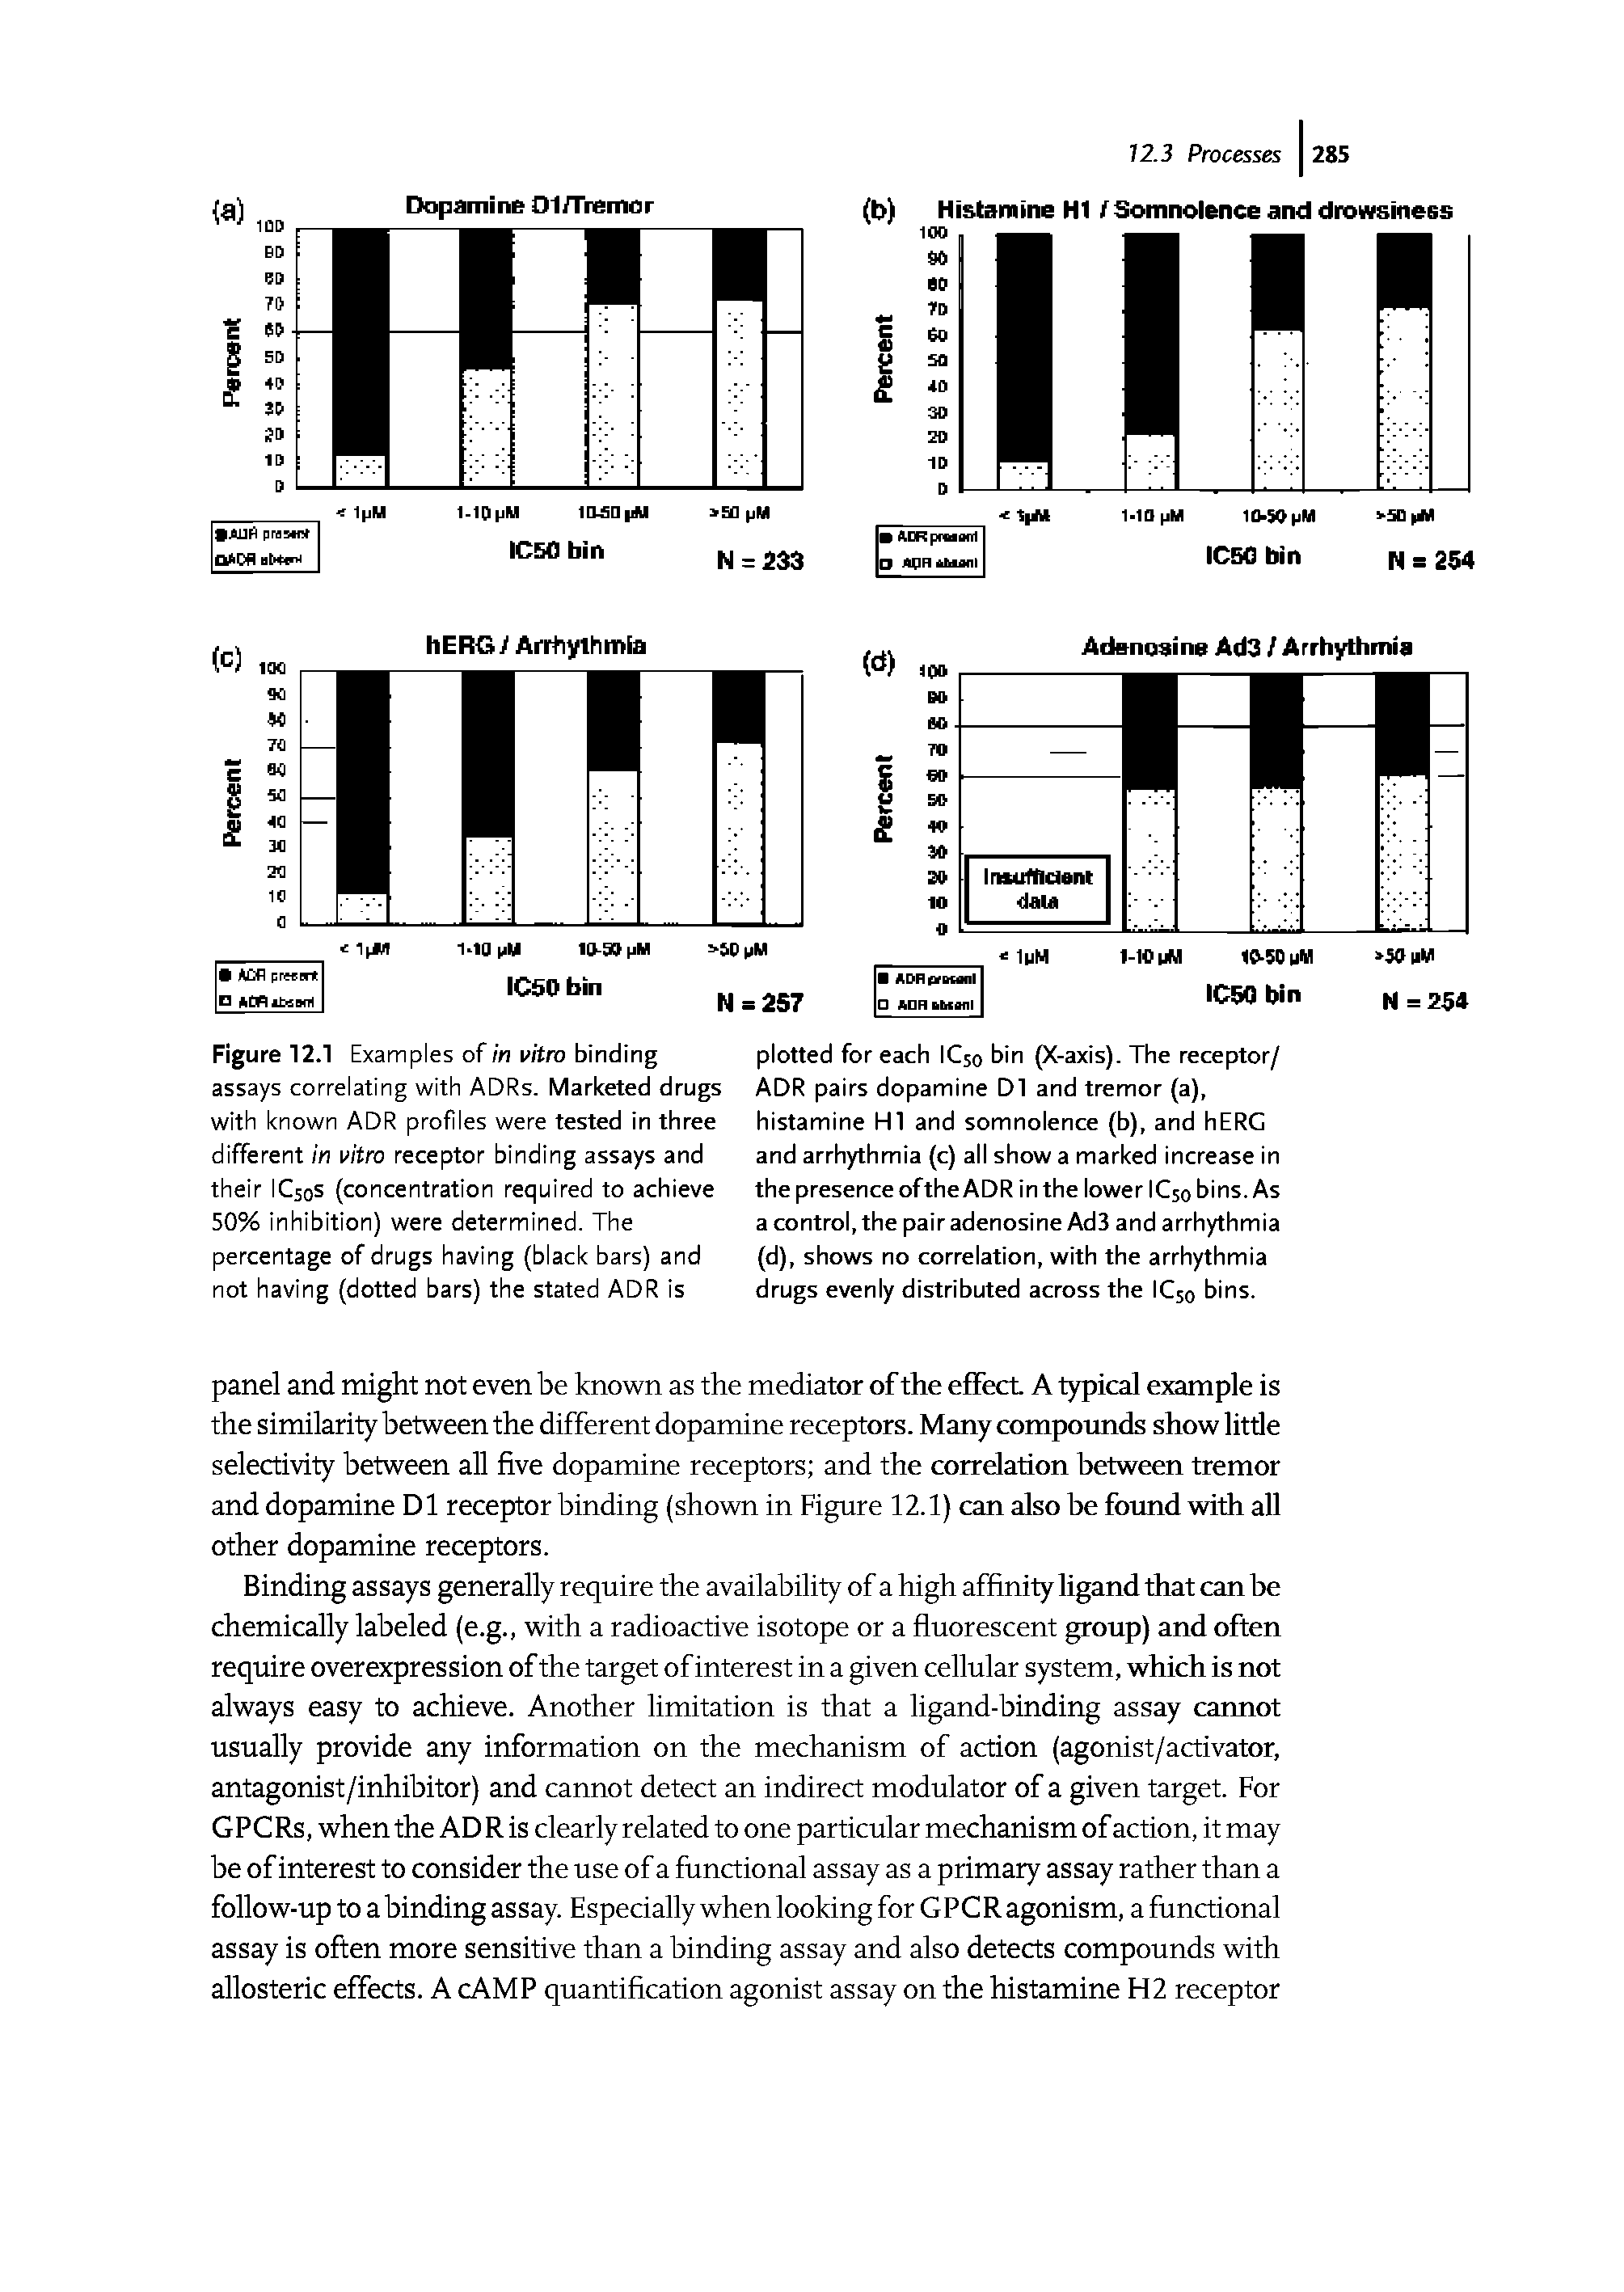 Figure 12.1 Examples of in vitro binding assays correlating with ADRs. Marketed drugs with known ADR profiles were tested in three different in vitro receptor binding assays and their IC50S (concentration required to achieve 50% inhibition) were determined. The percentage of drugs having (black bars) and not having (dotted bars) the stated ADR is...